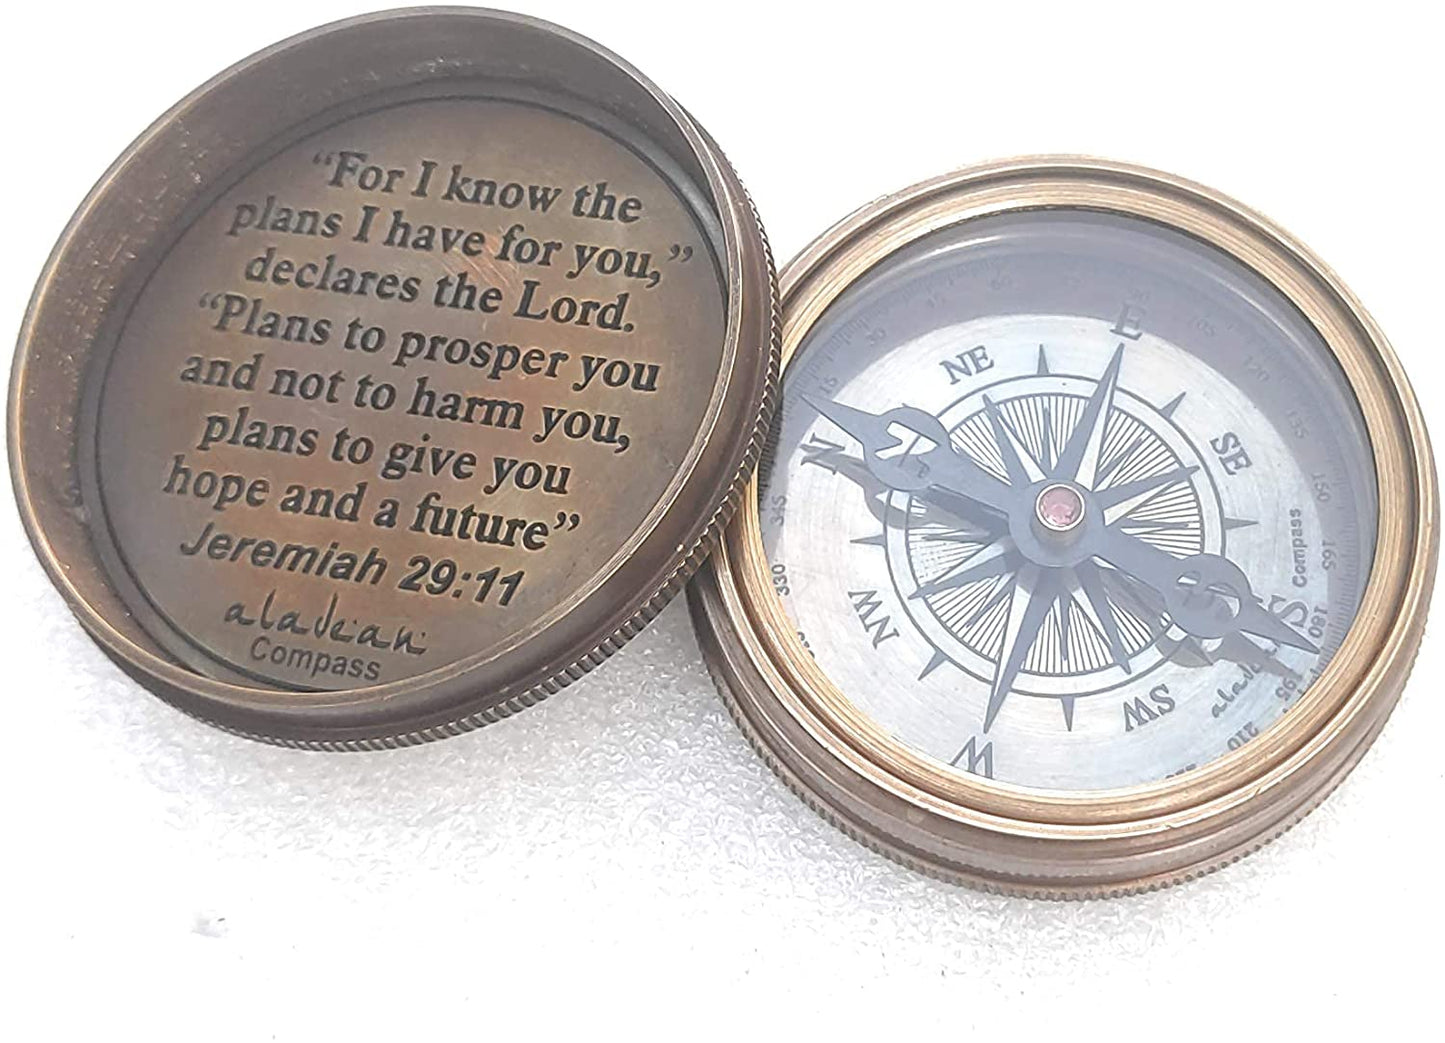 Gift for Grandson Brass Compass Engraved Quote | Memory Present to My Grandson Birthday, Baptism, Graduation, Confirmation, Love, Gift idea by Grandpa Grandma